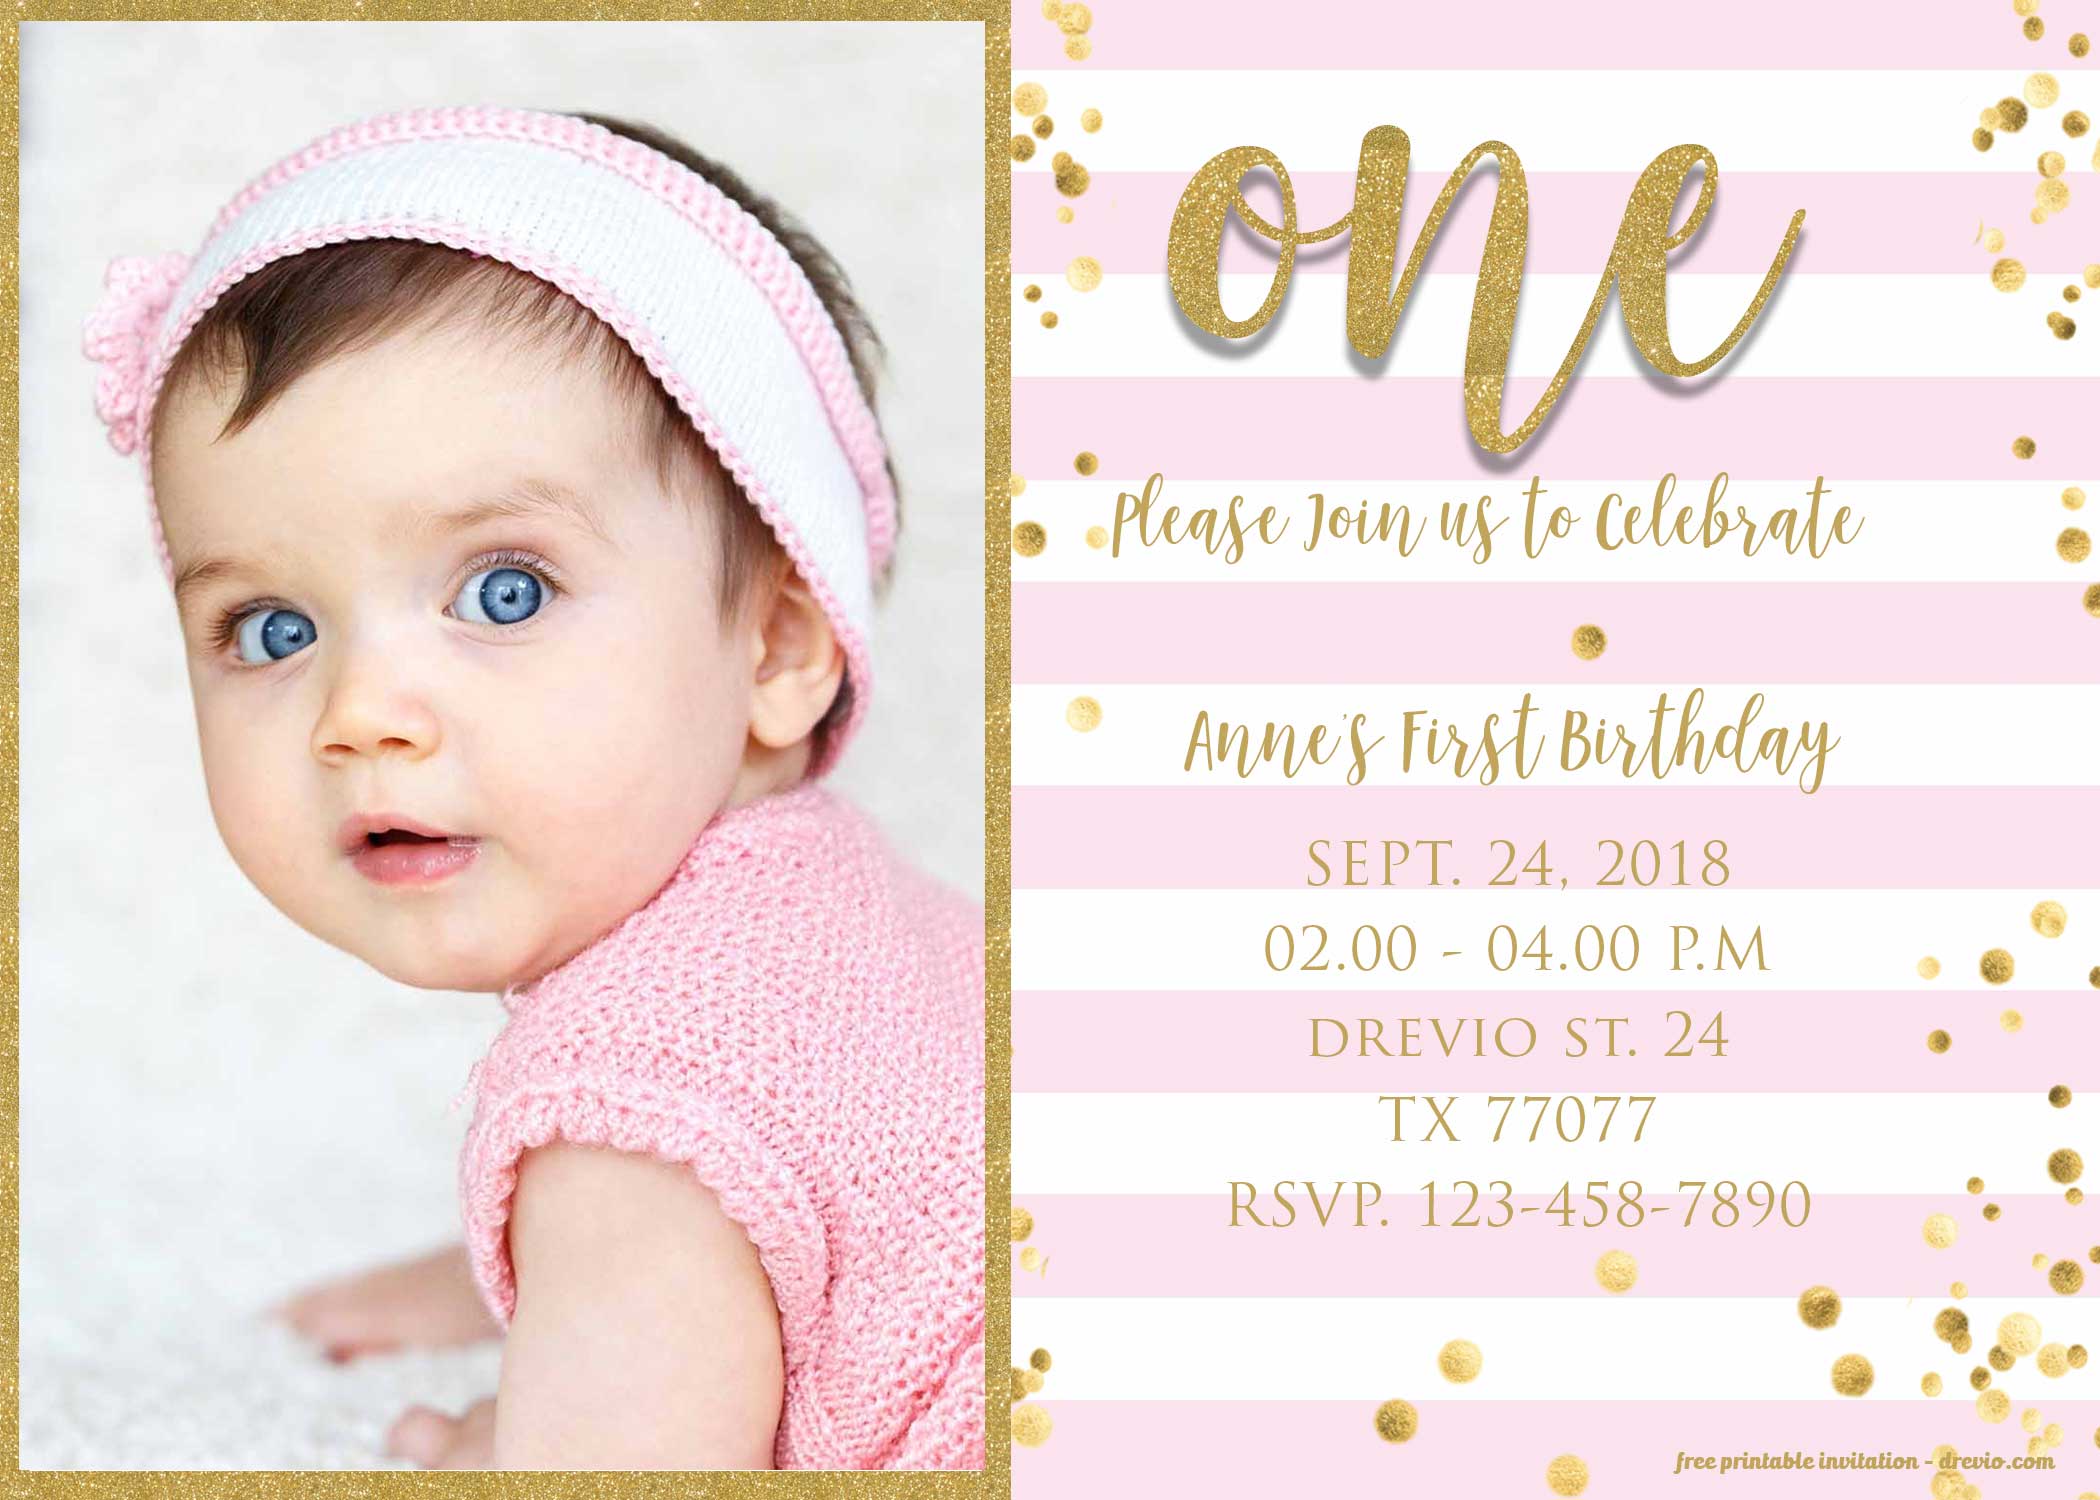 FREE 1st Birthday Invitations Template for Girl